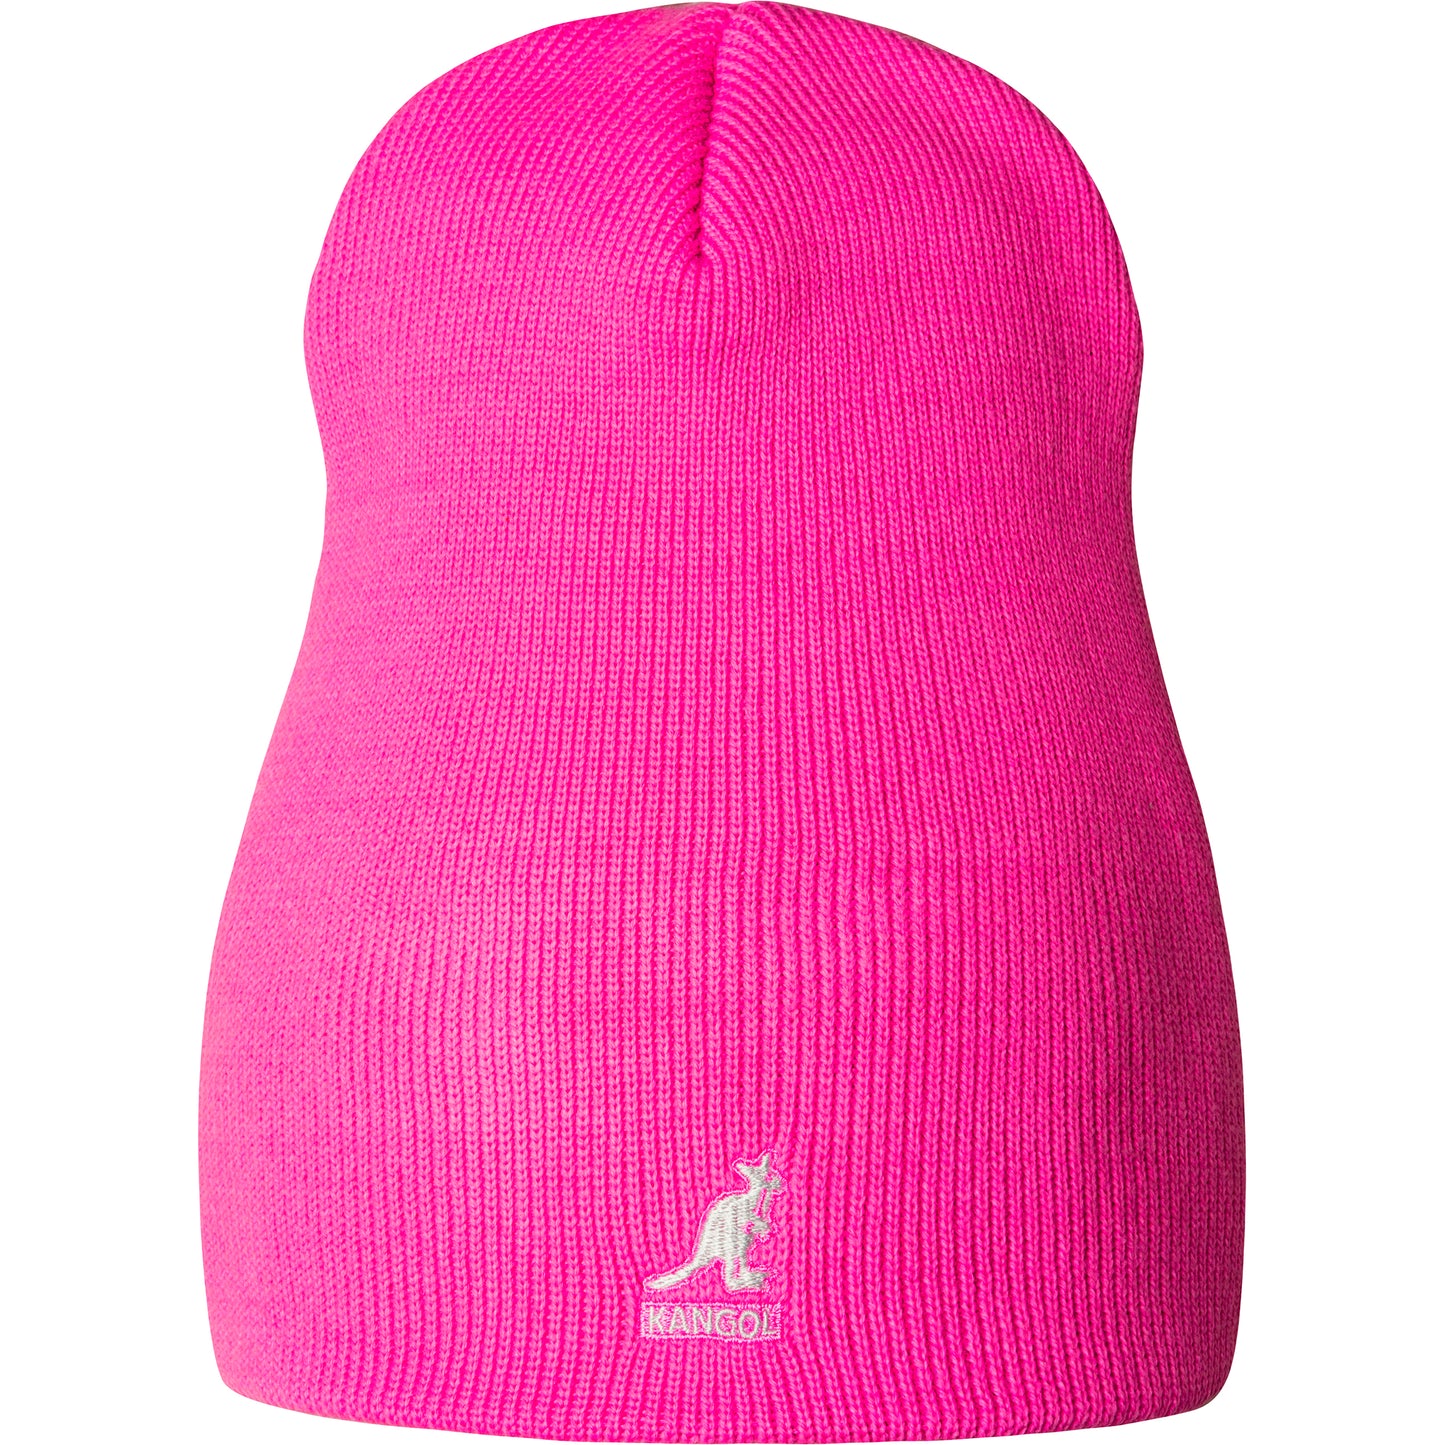 Kangol Pull On Beanie Electric Pink